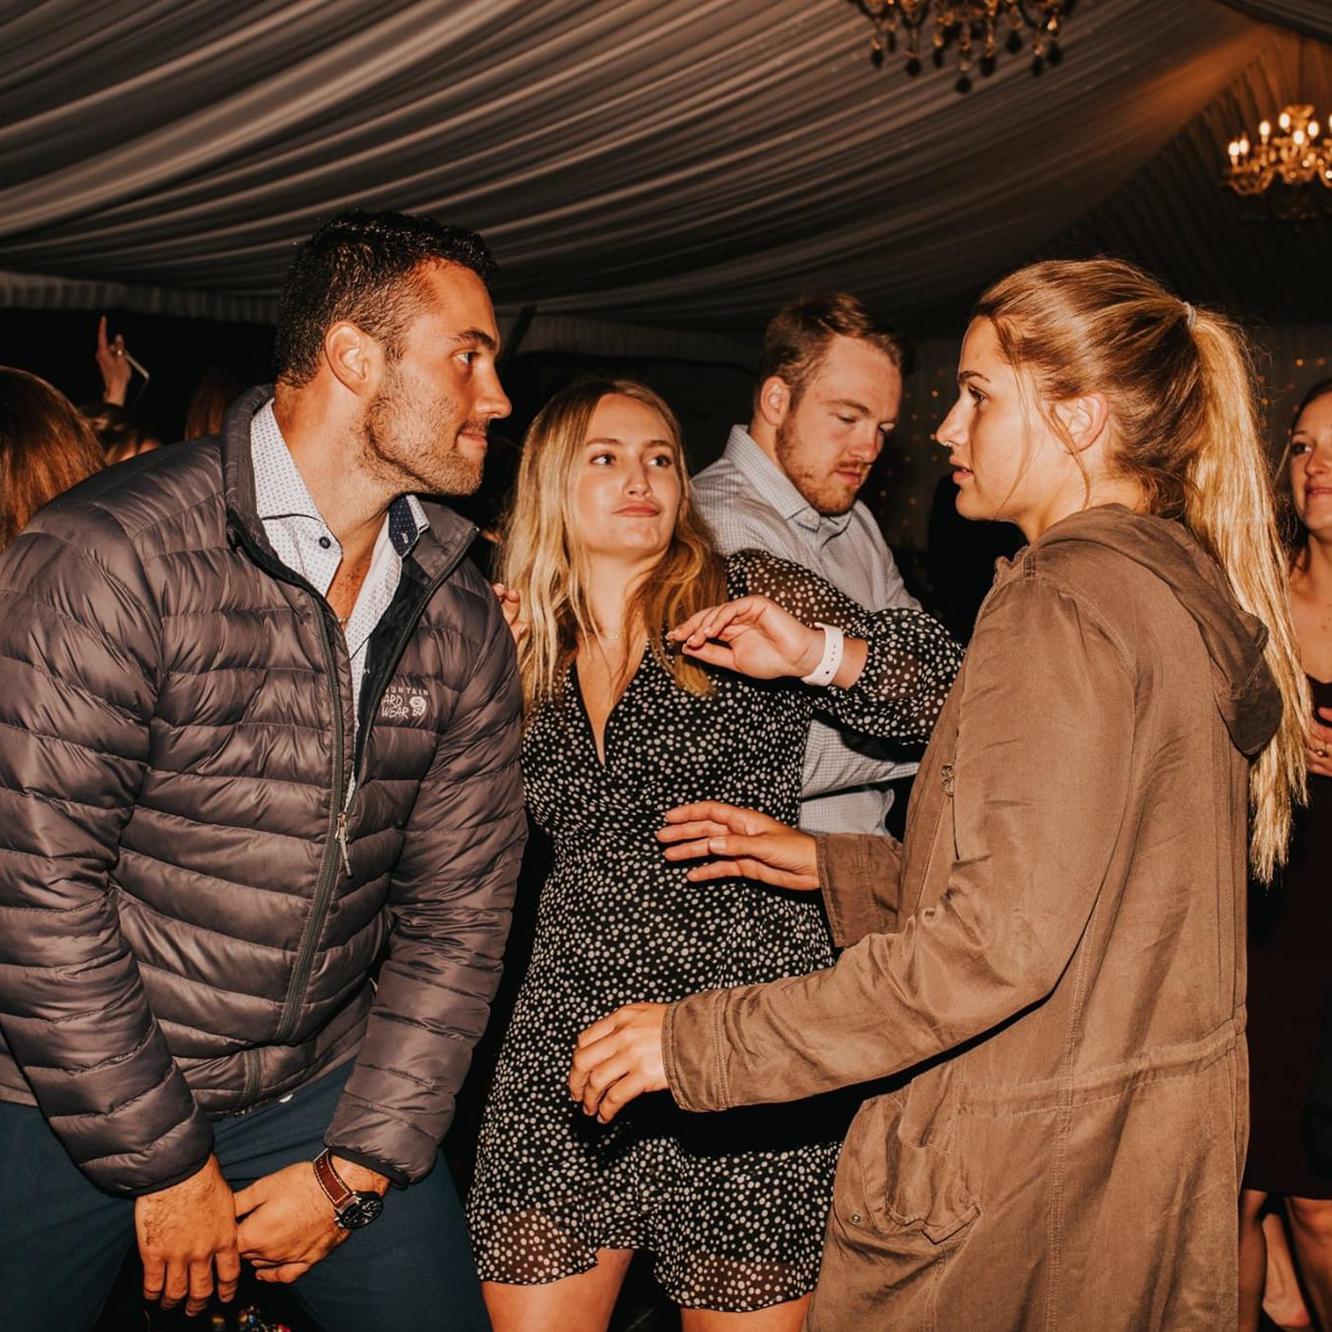 2019 Taylor and Trevor wedding celebration: the dance floor requires focus and energy